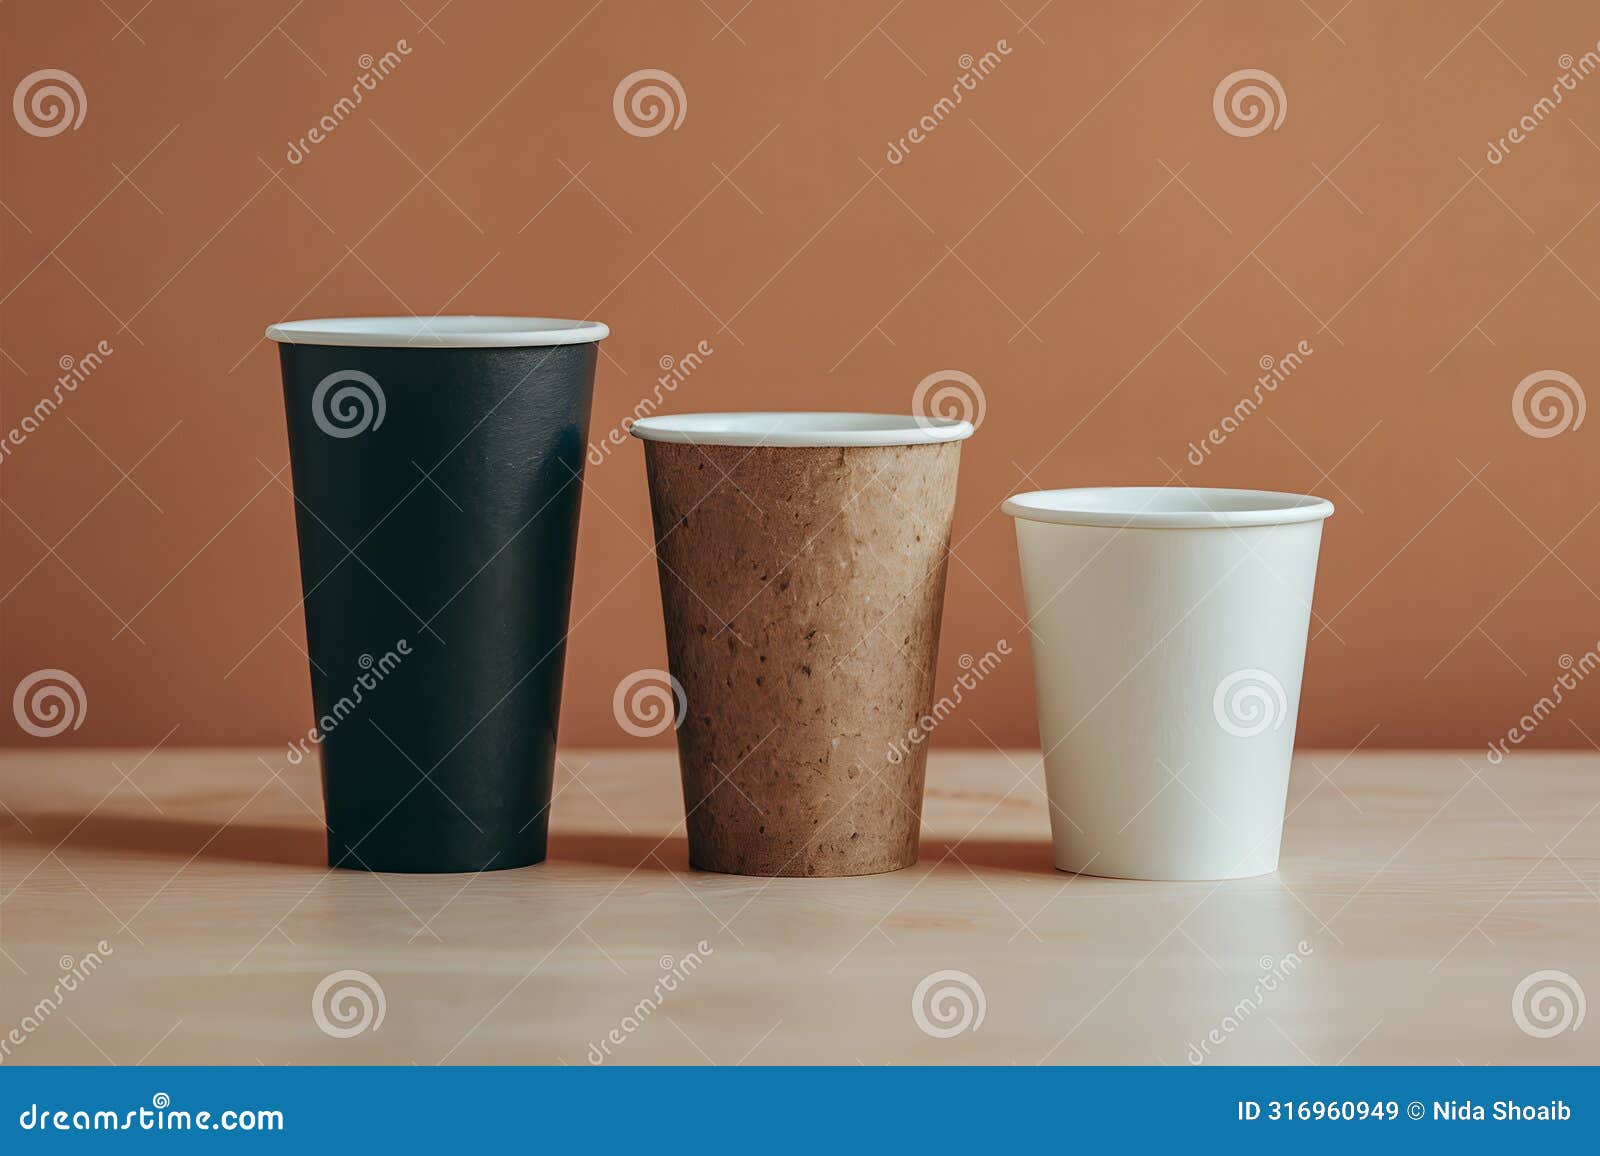 diverse paper cups in varying sizes and colors cater to different preferences